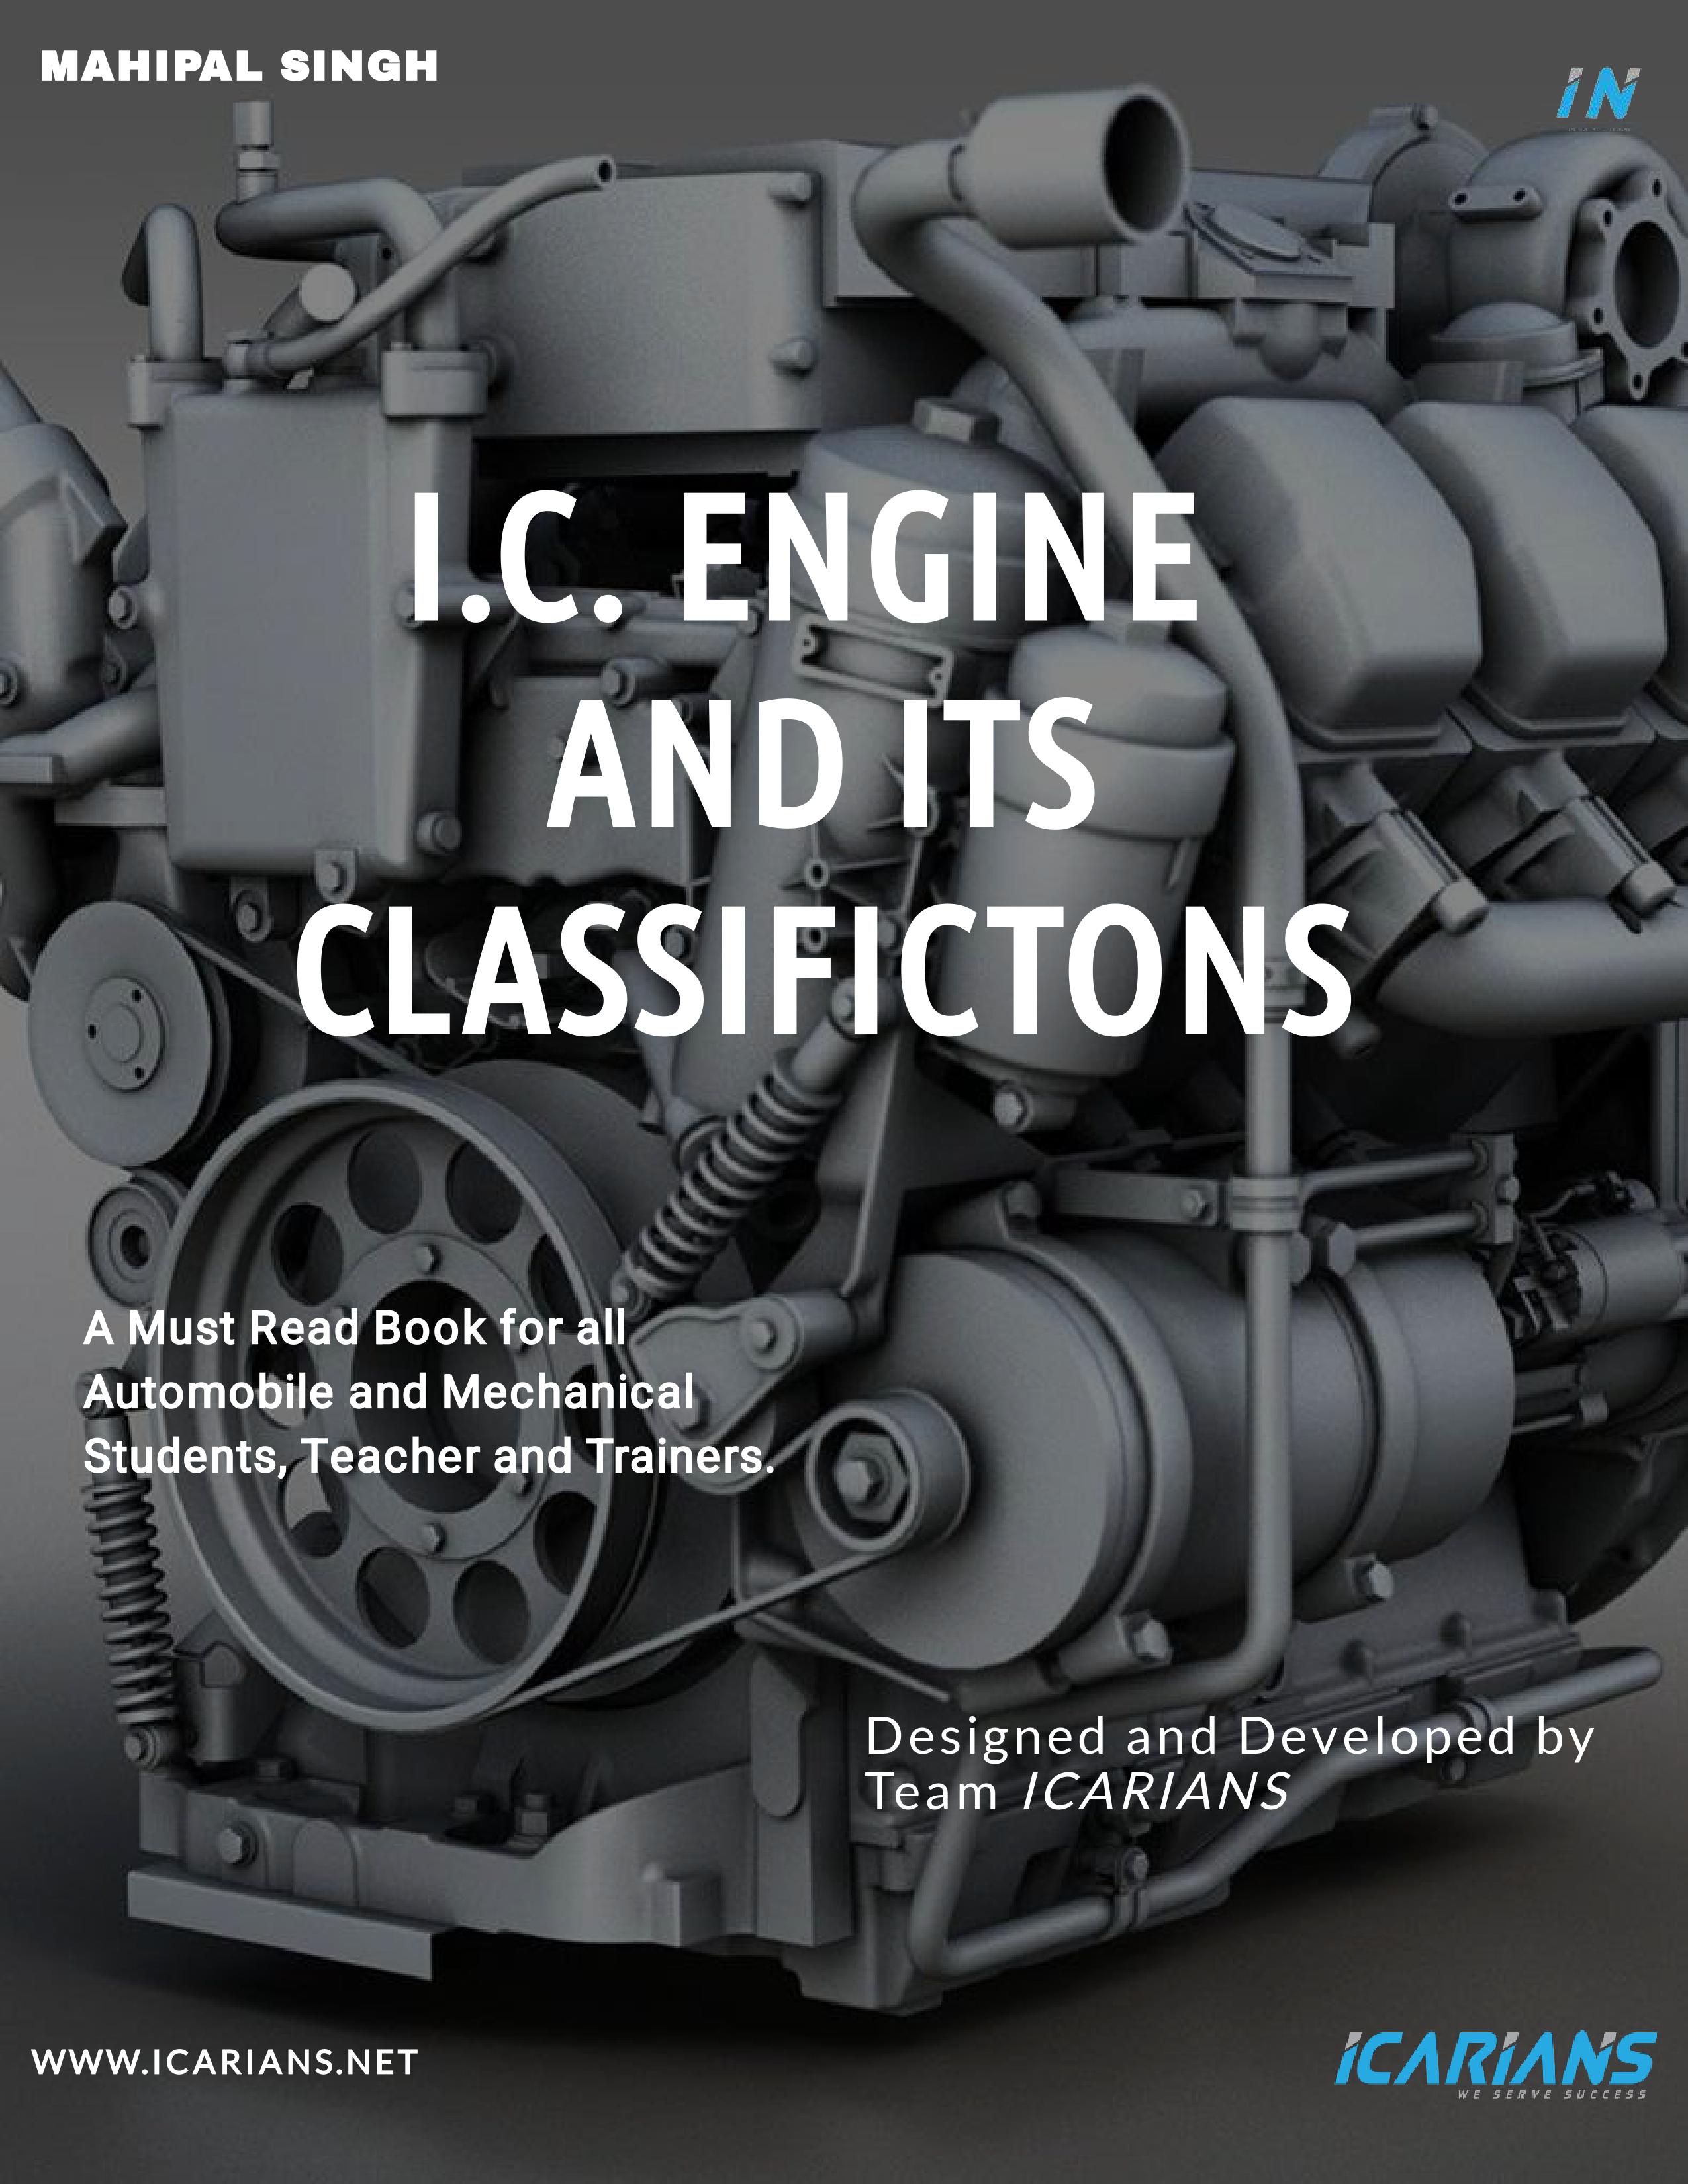 I.C. ENGINE AND ITS CLASSIFICTONS